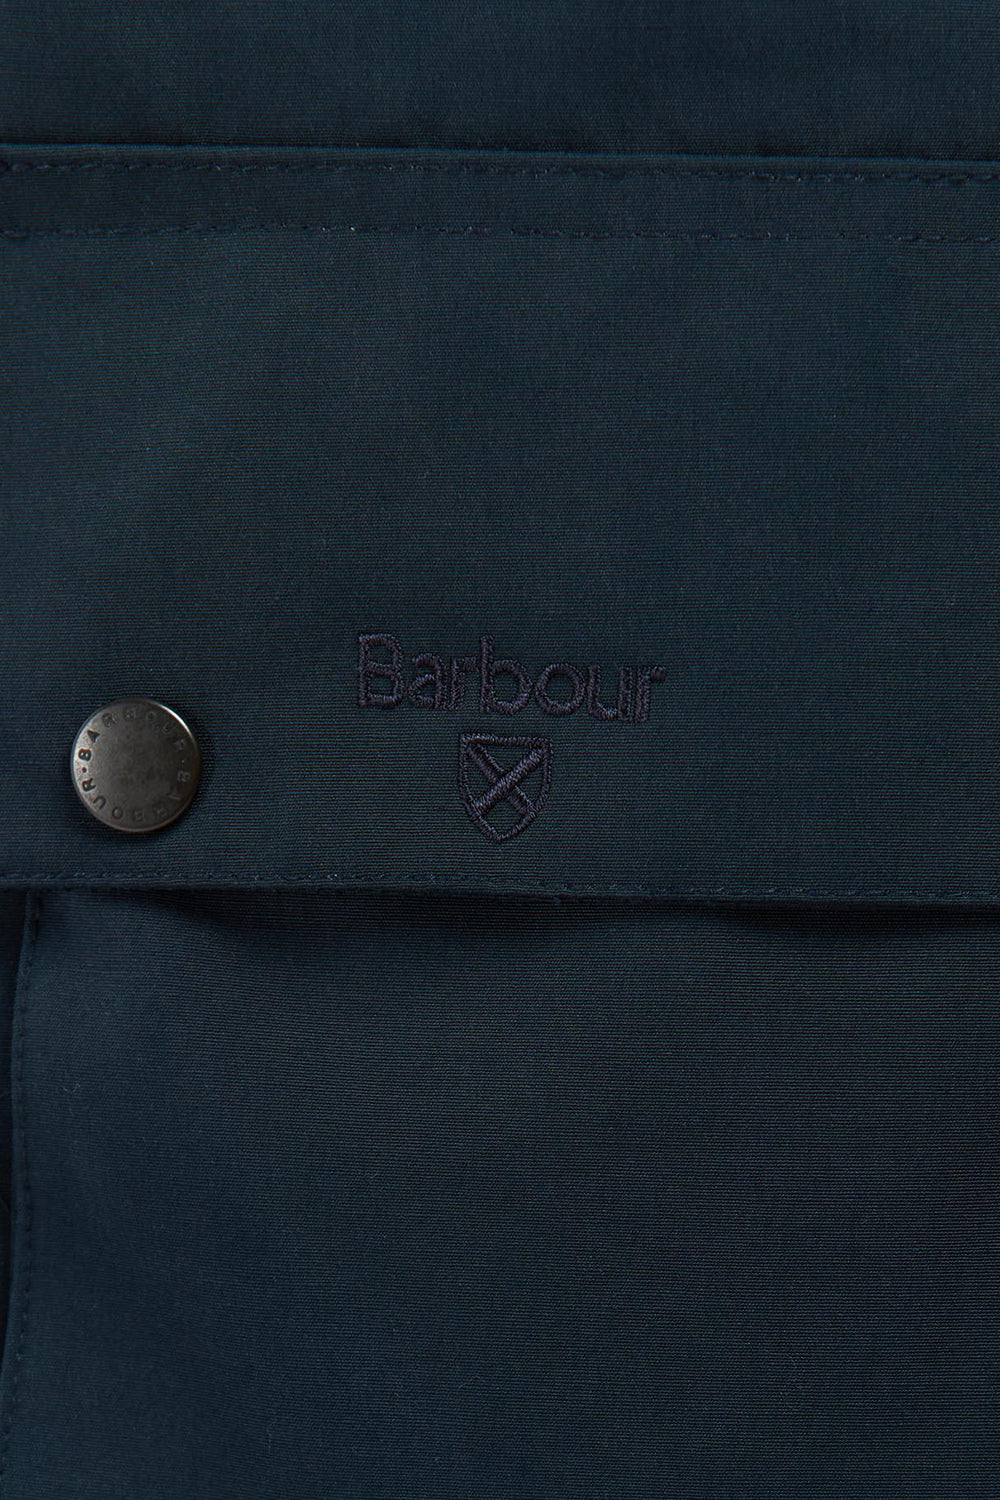 Barbour Winter Ashby Jacket (Navy)